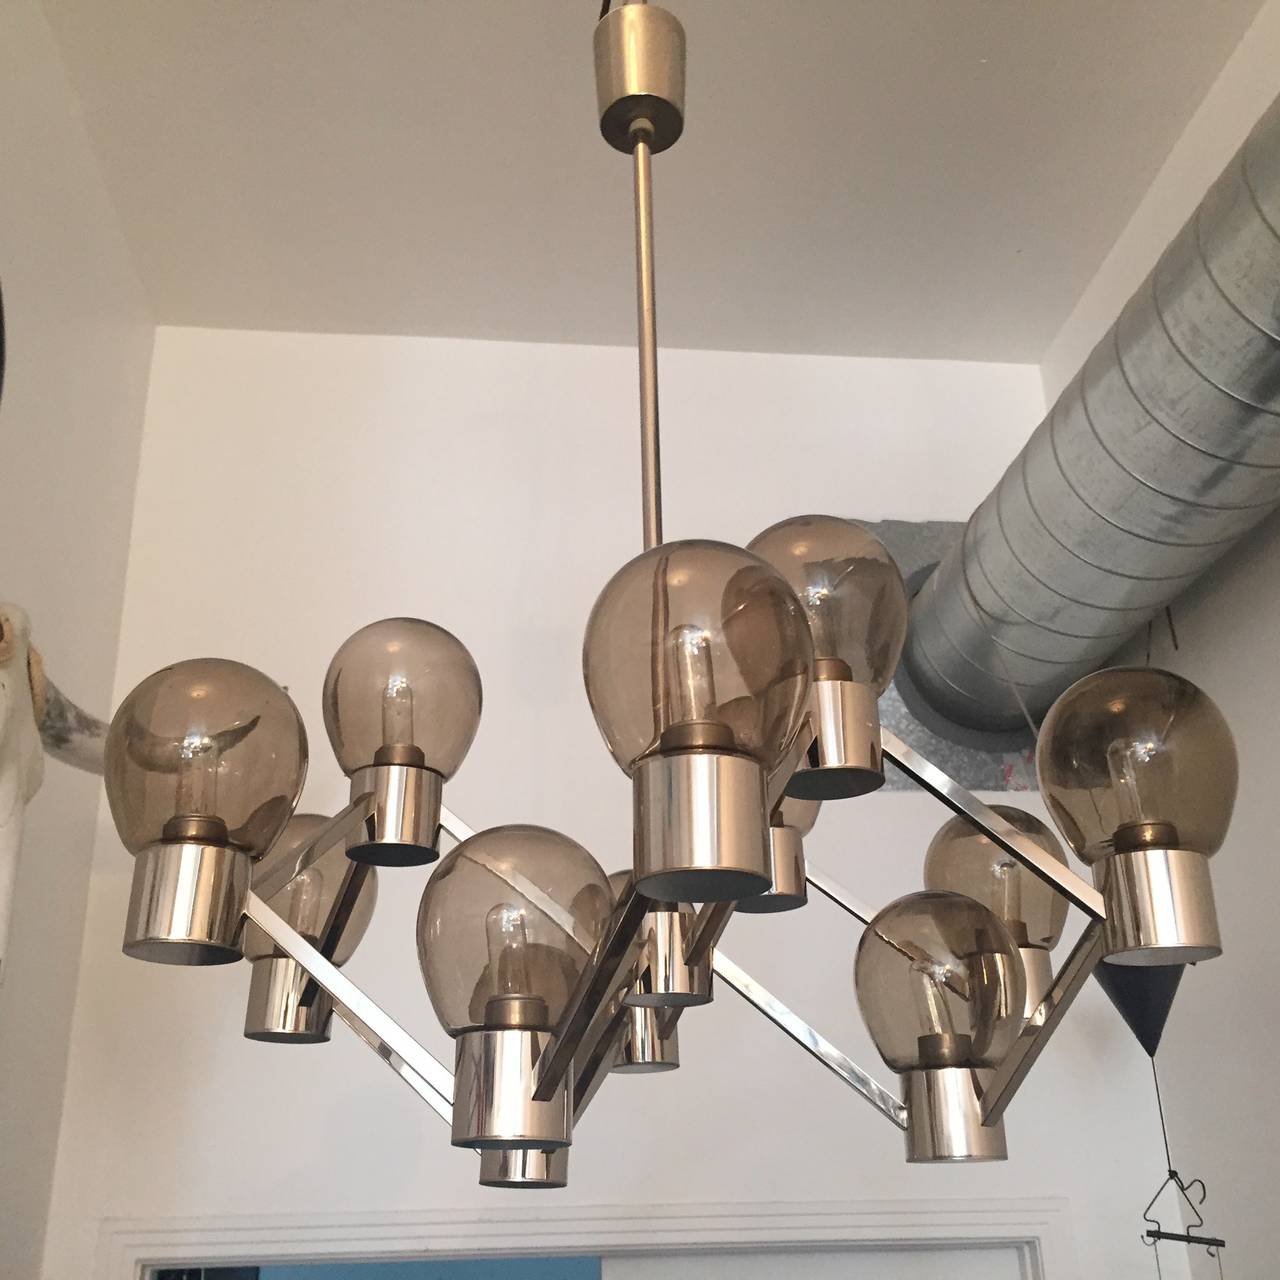 A great 1970s German polished chrome Space Age fixture with handblown smoked glass shades. Rewired.